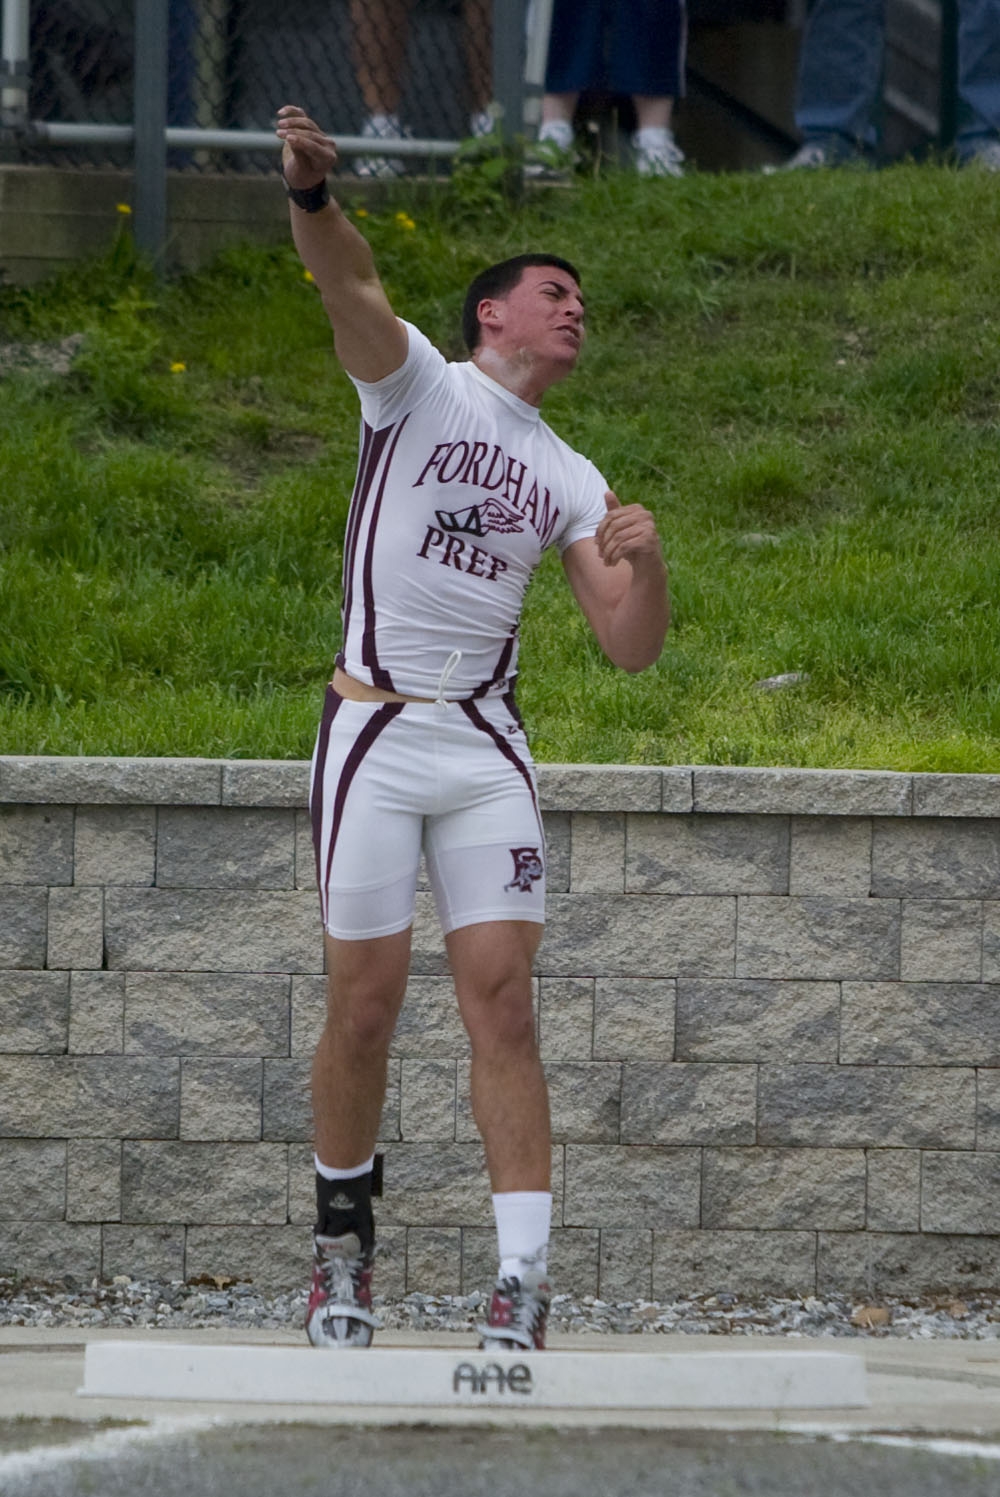 Mike Seminario '11 tossed the Shot 52'10" en route to 9th place at the Penn Relays and the top throw in NY State this season.